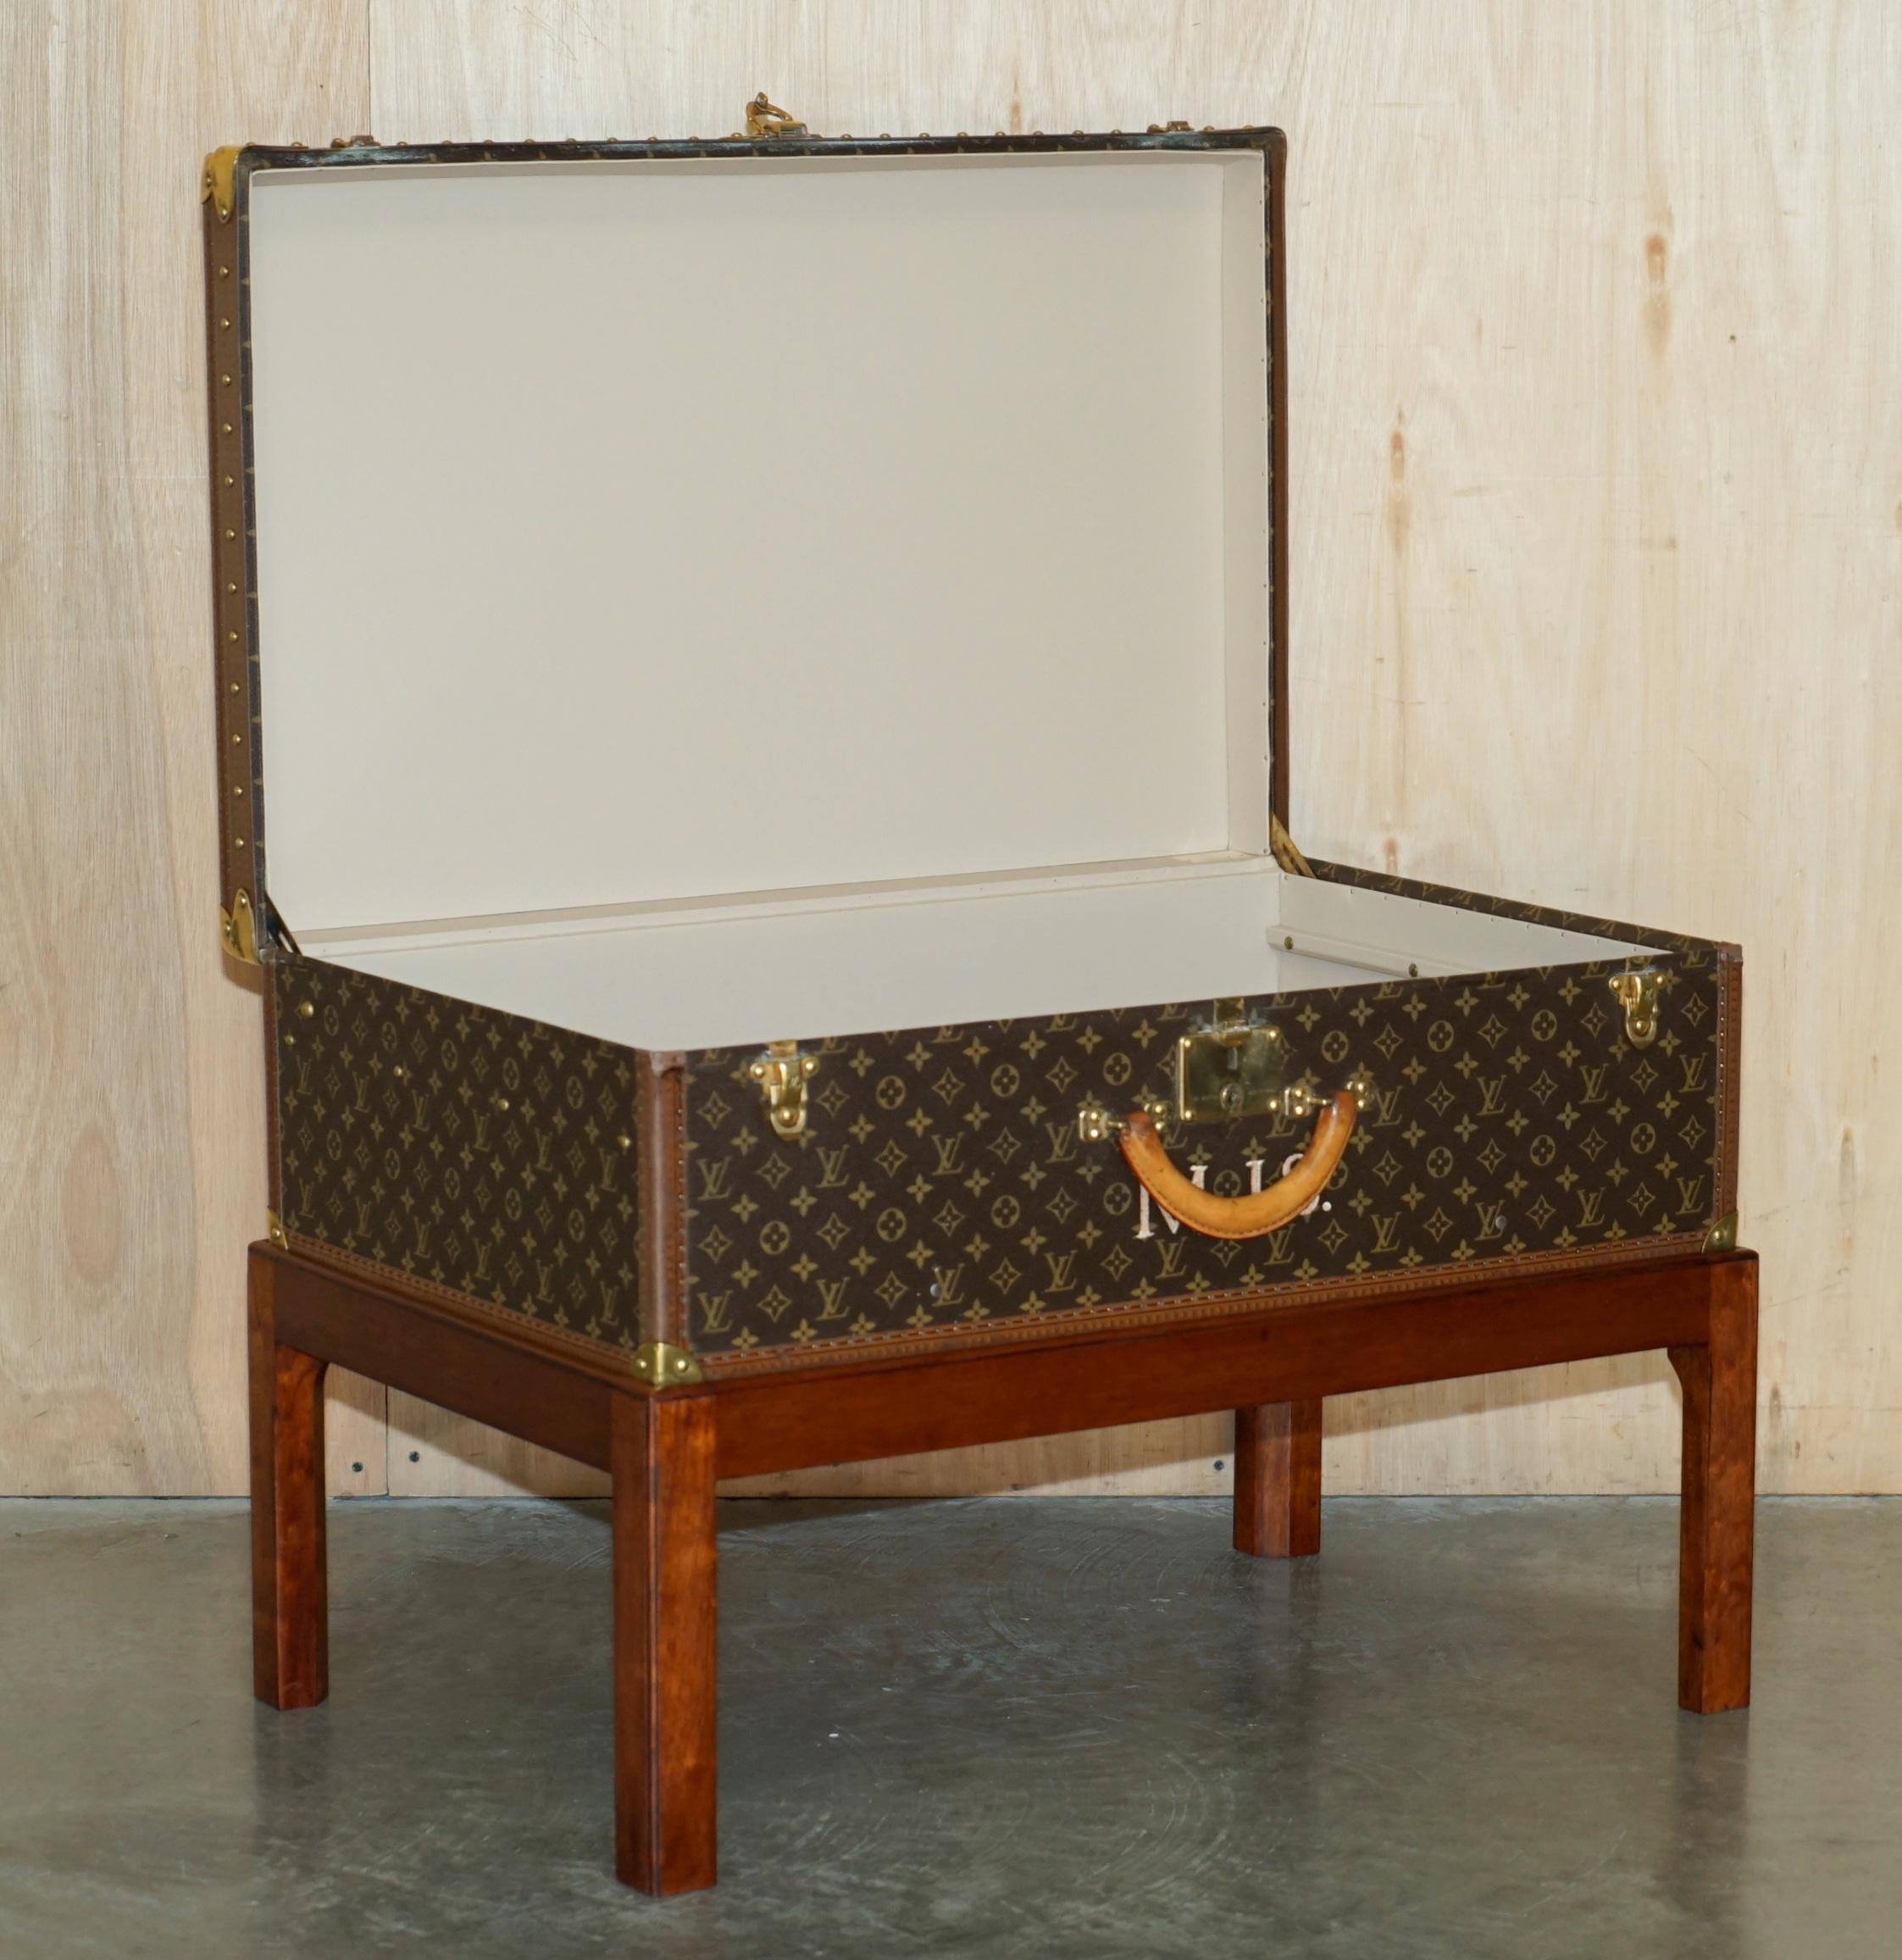 FULLY RESTORED ViNTAGE BROWN LEATHER LOUIS VUITTON SUITCASE TRUNK COFFEE TABLE 8